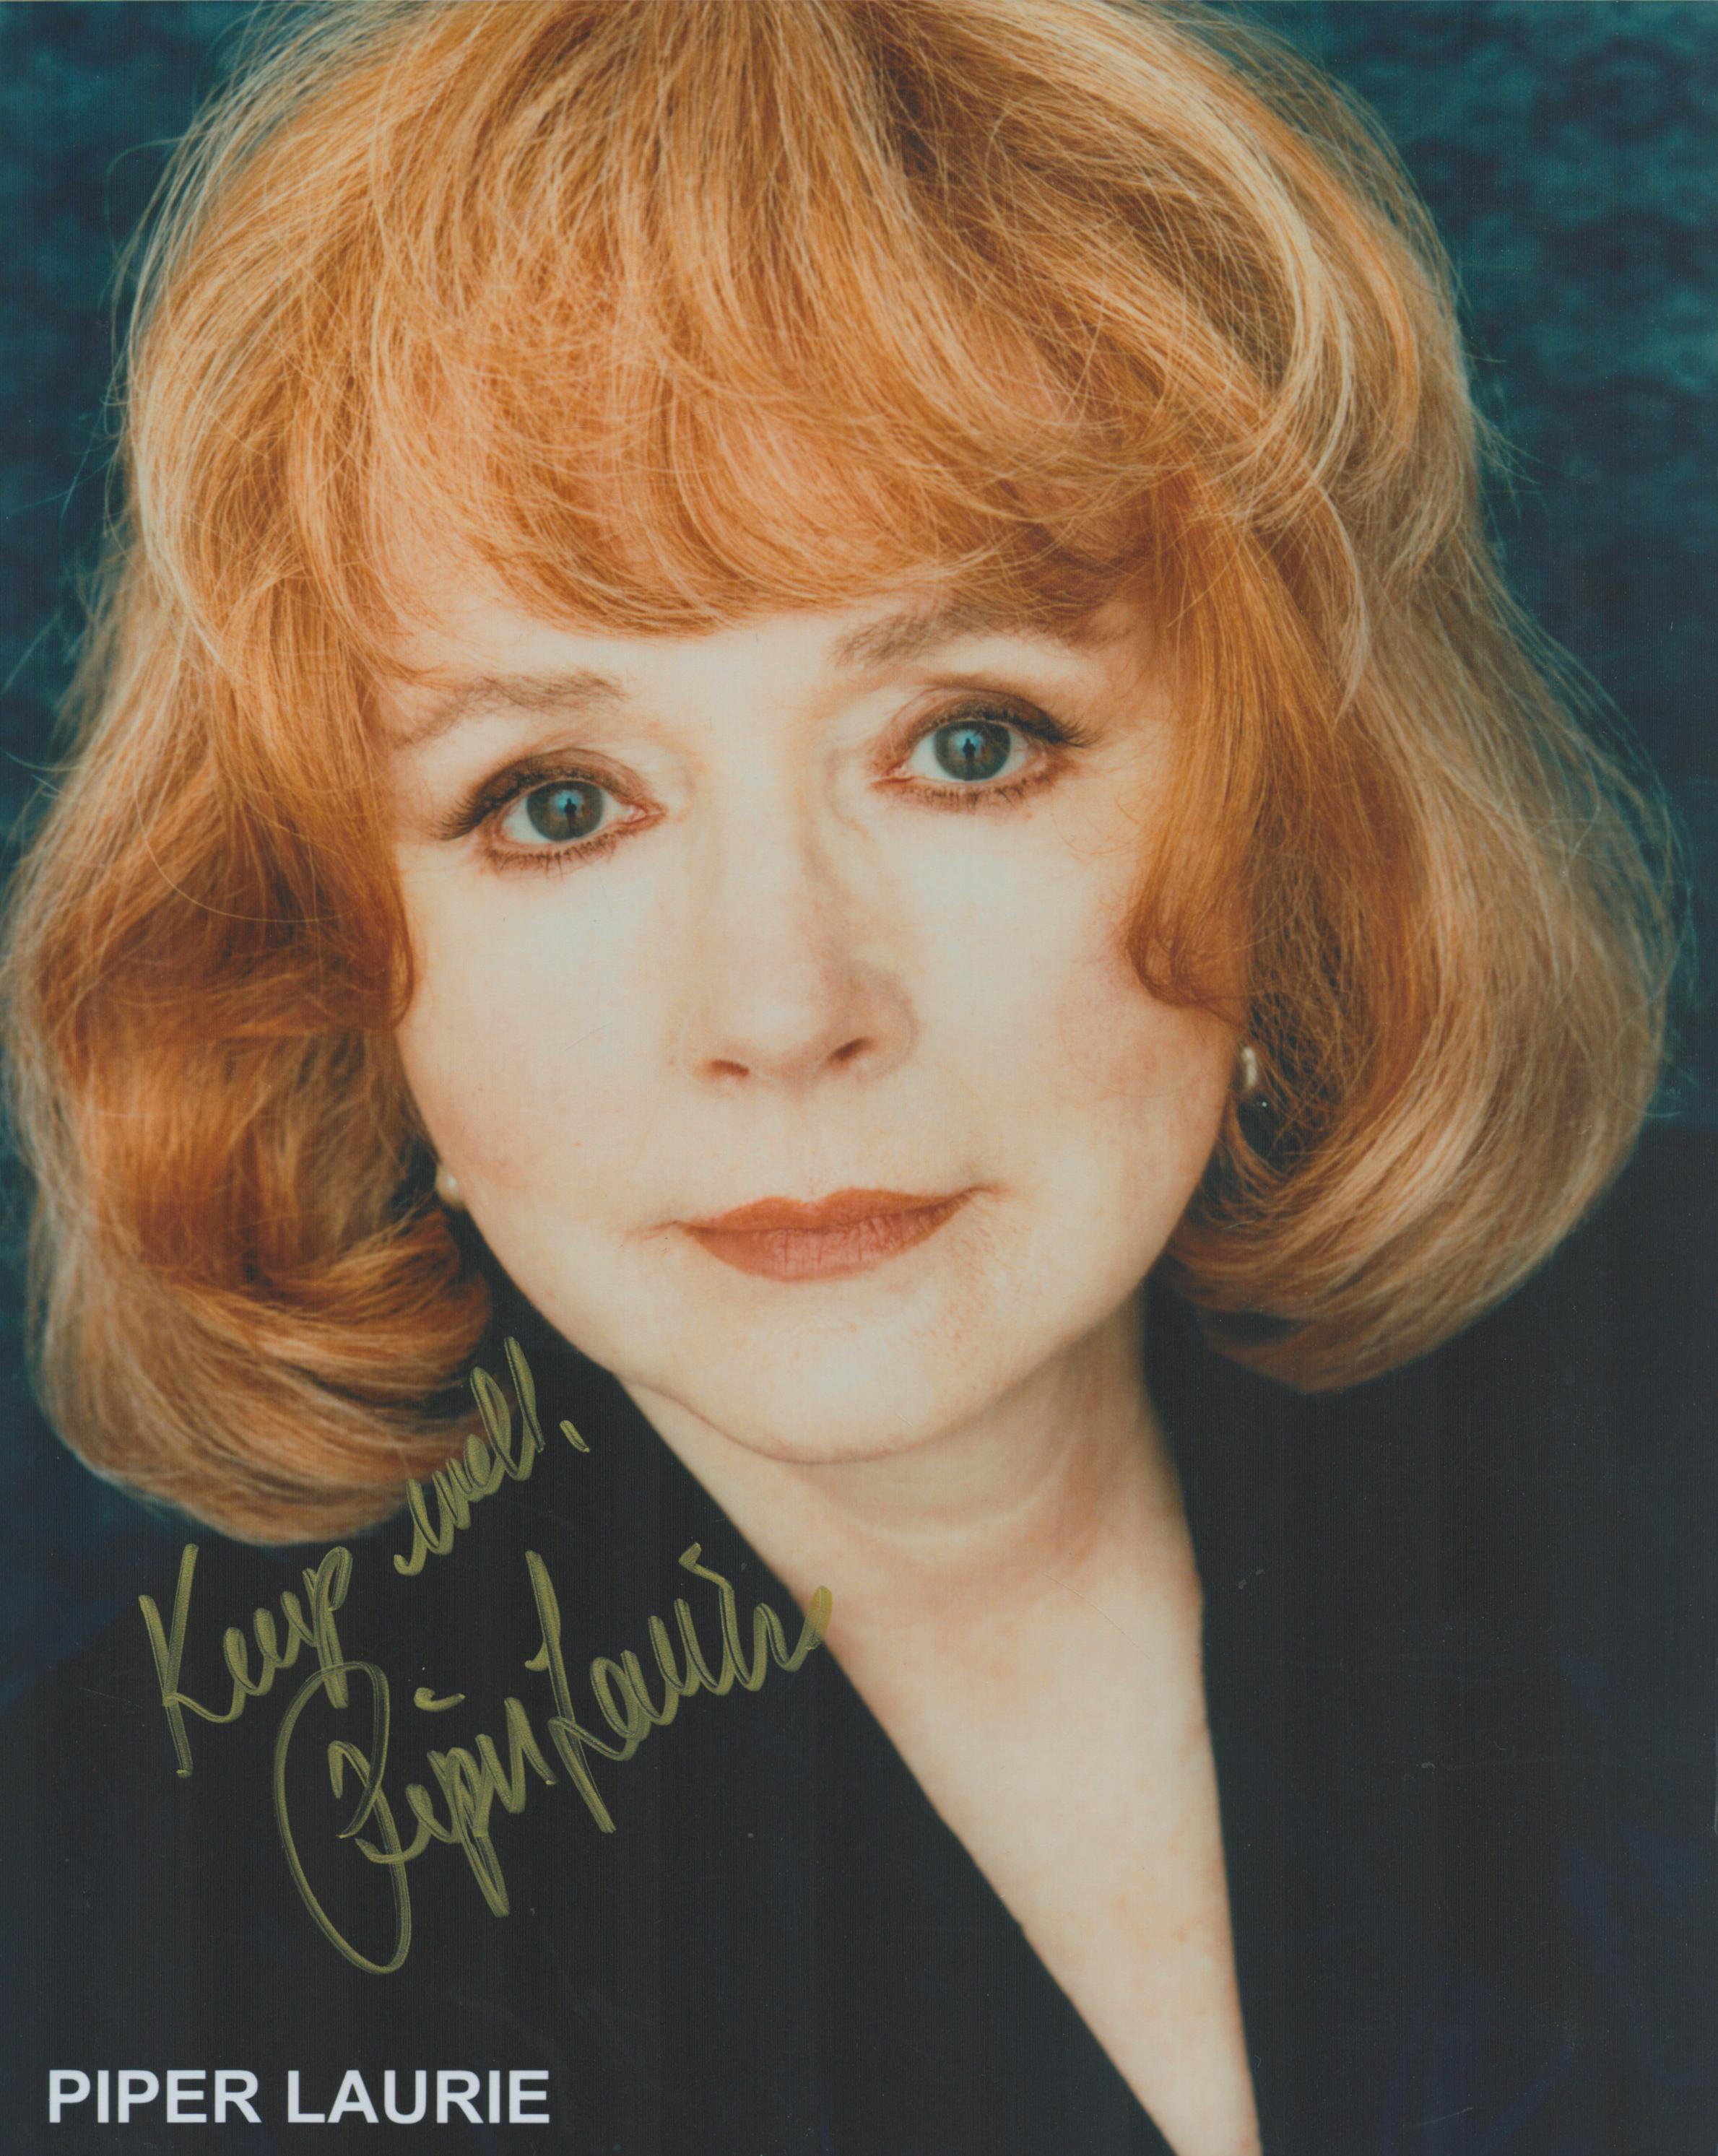 Piper Laurie signed 10x8 inch colour promo photo. Good Condition. All autographs come with a